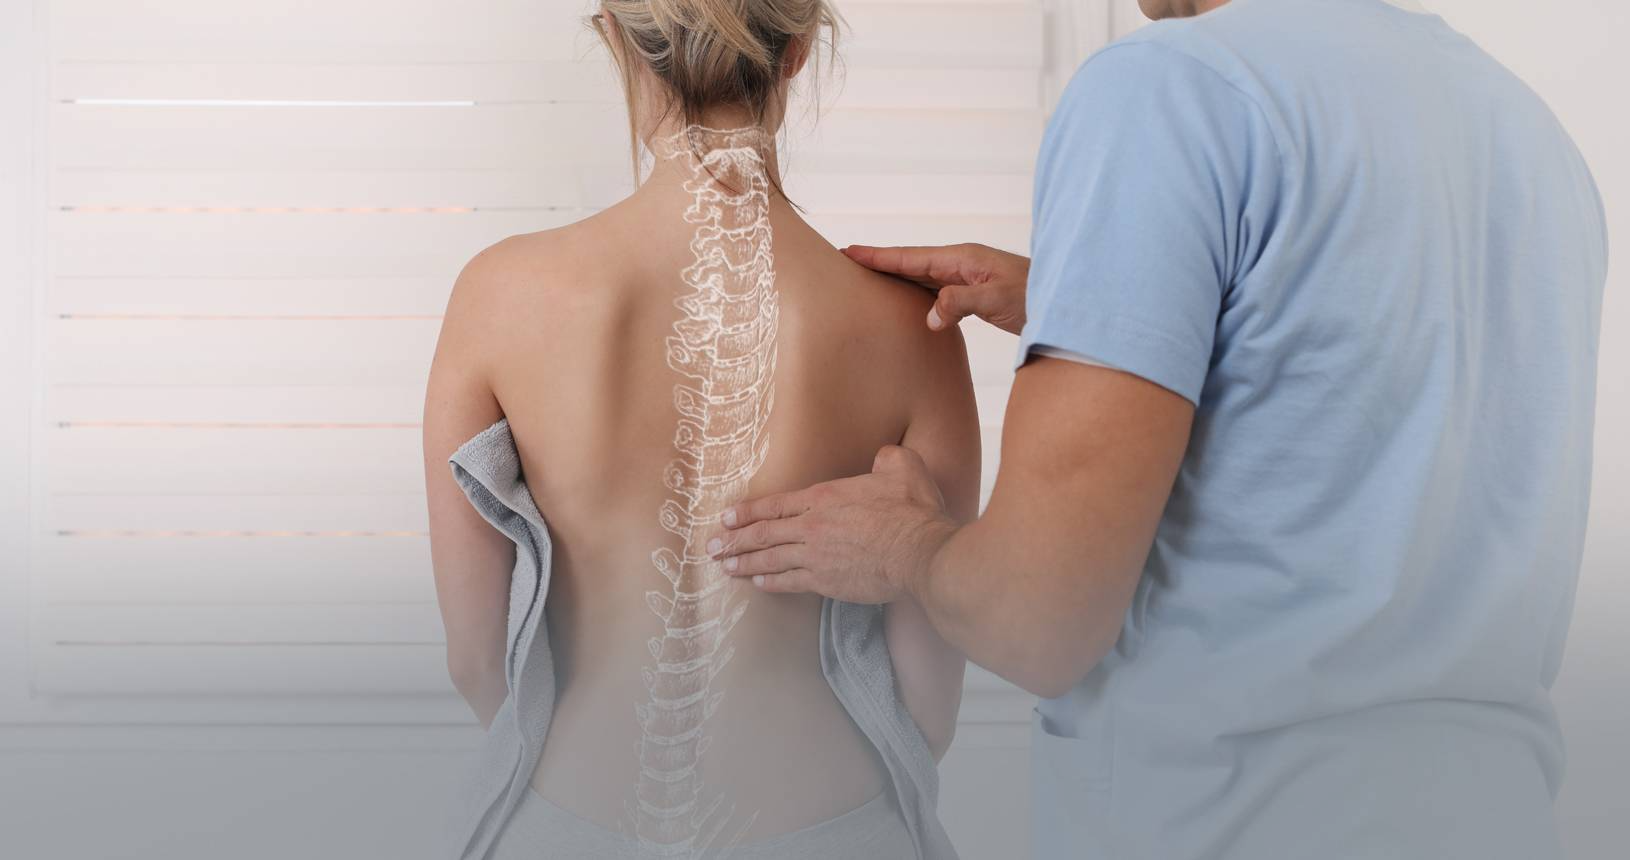 How poor posture causes back pain, and how to prevent it?